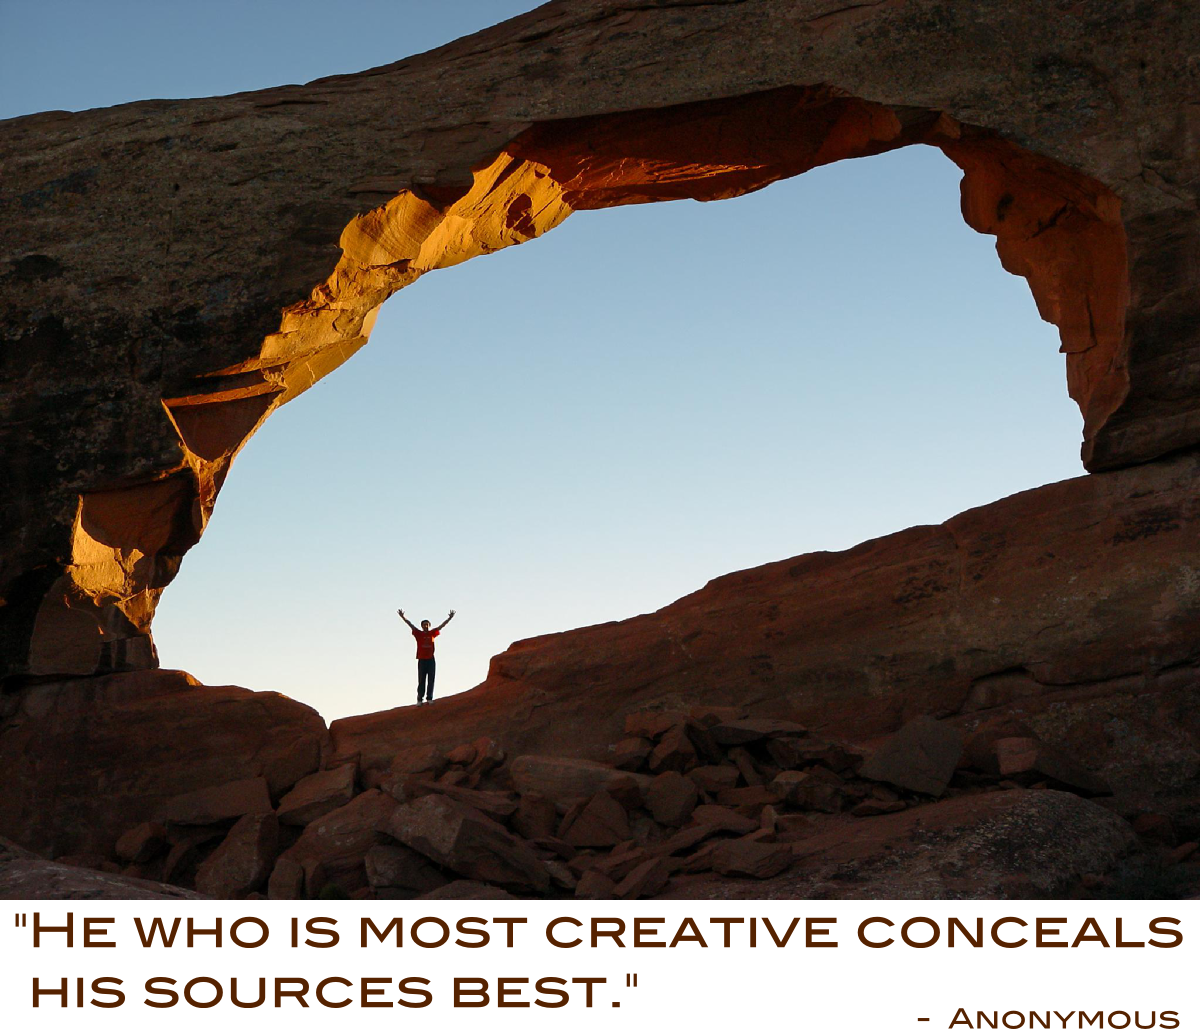 "He who is most creative conceals his sources best" - Anonymous